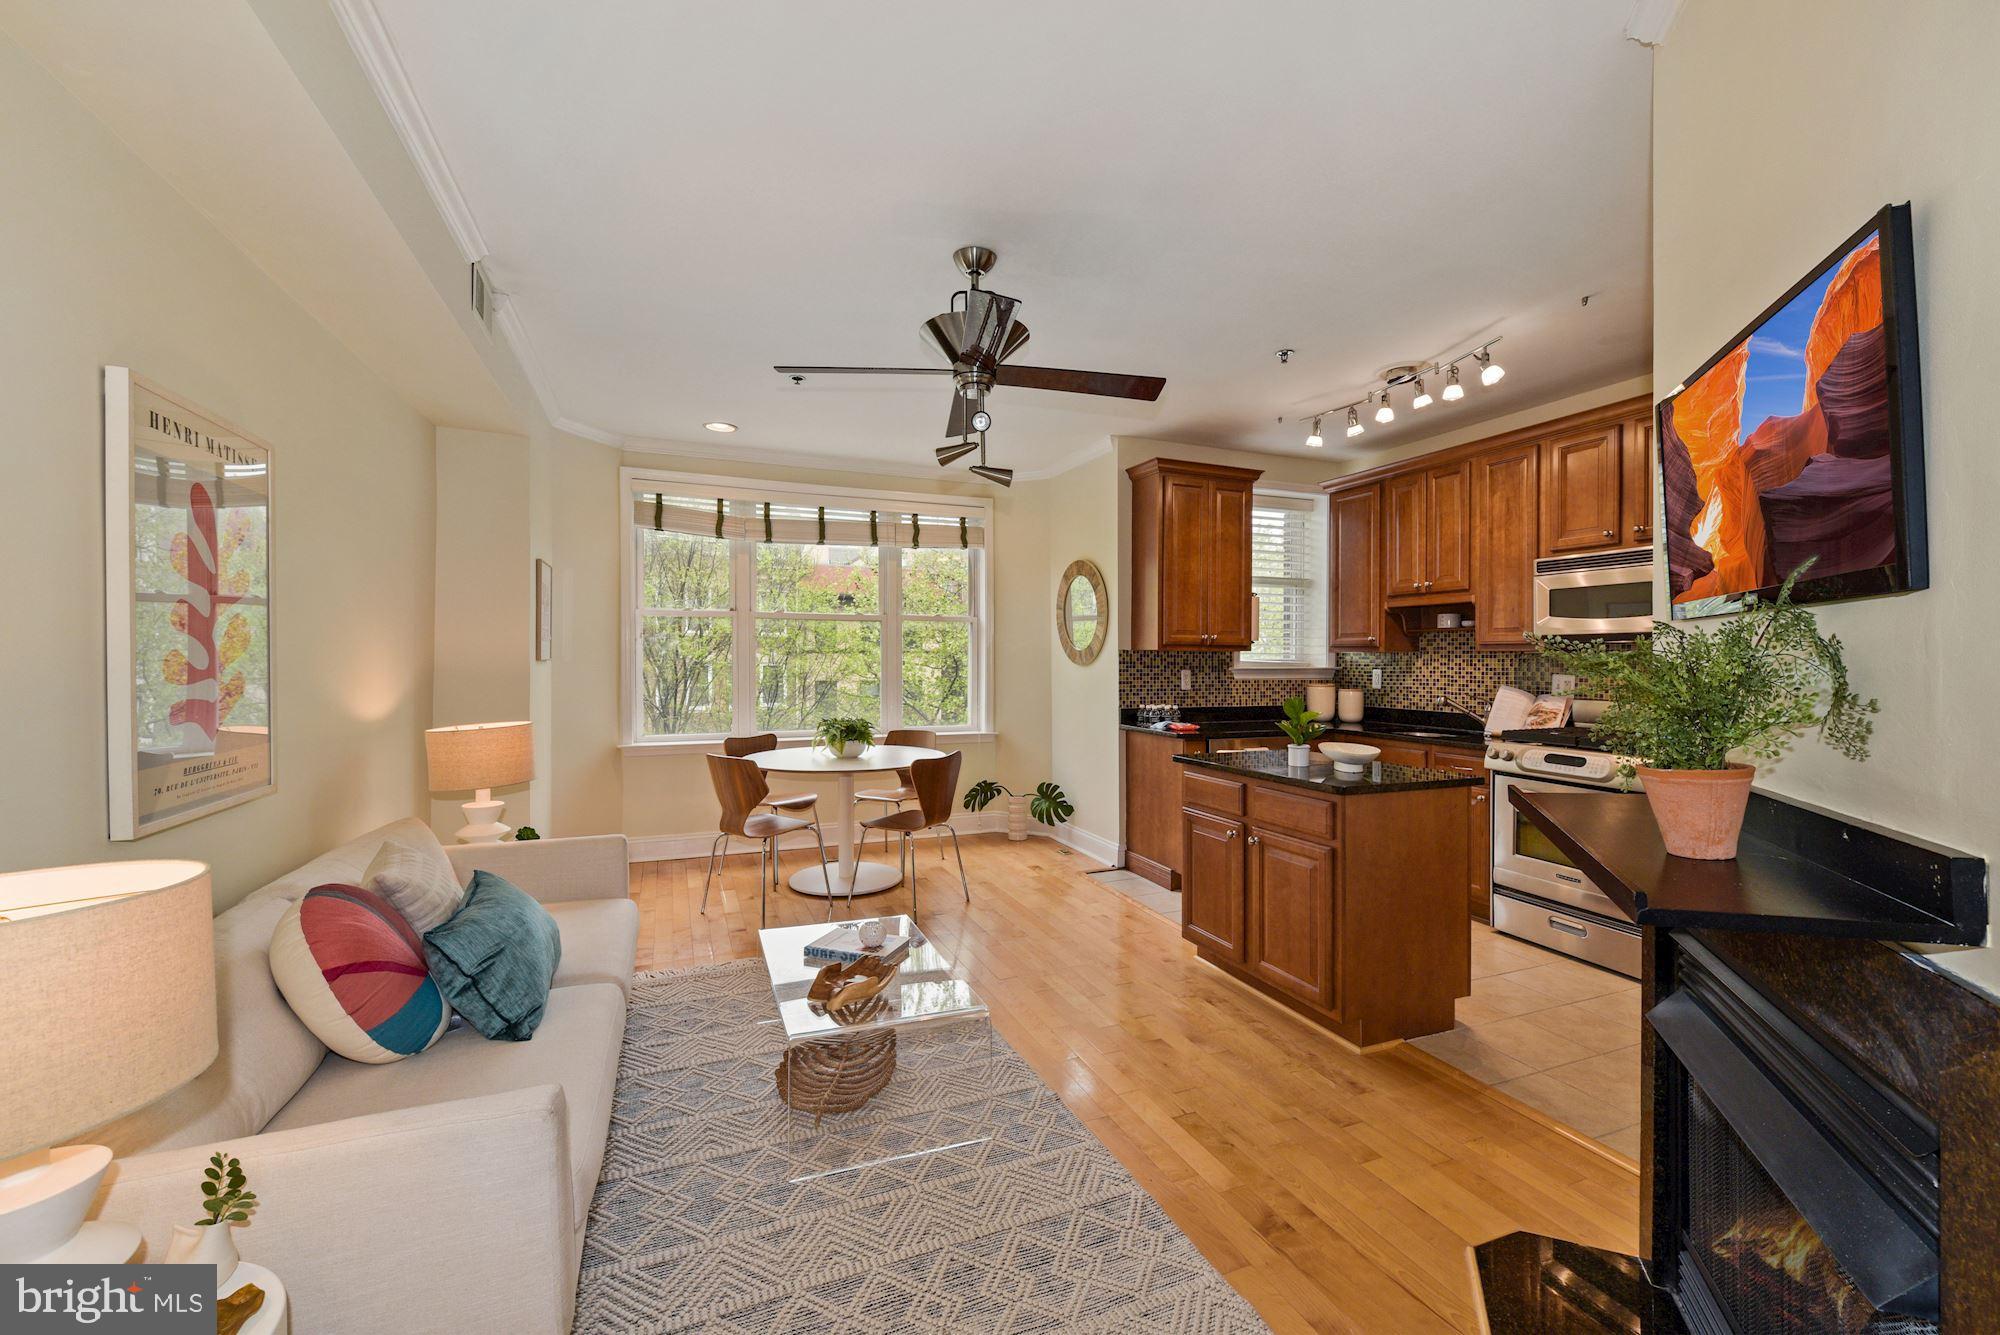 a living room with stainless steel appliances granite countertop furniture a rug kitchen view and a large window